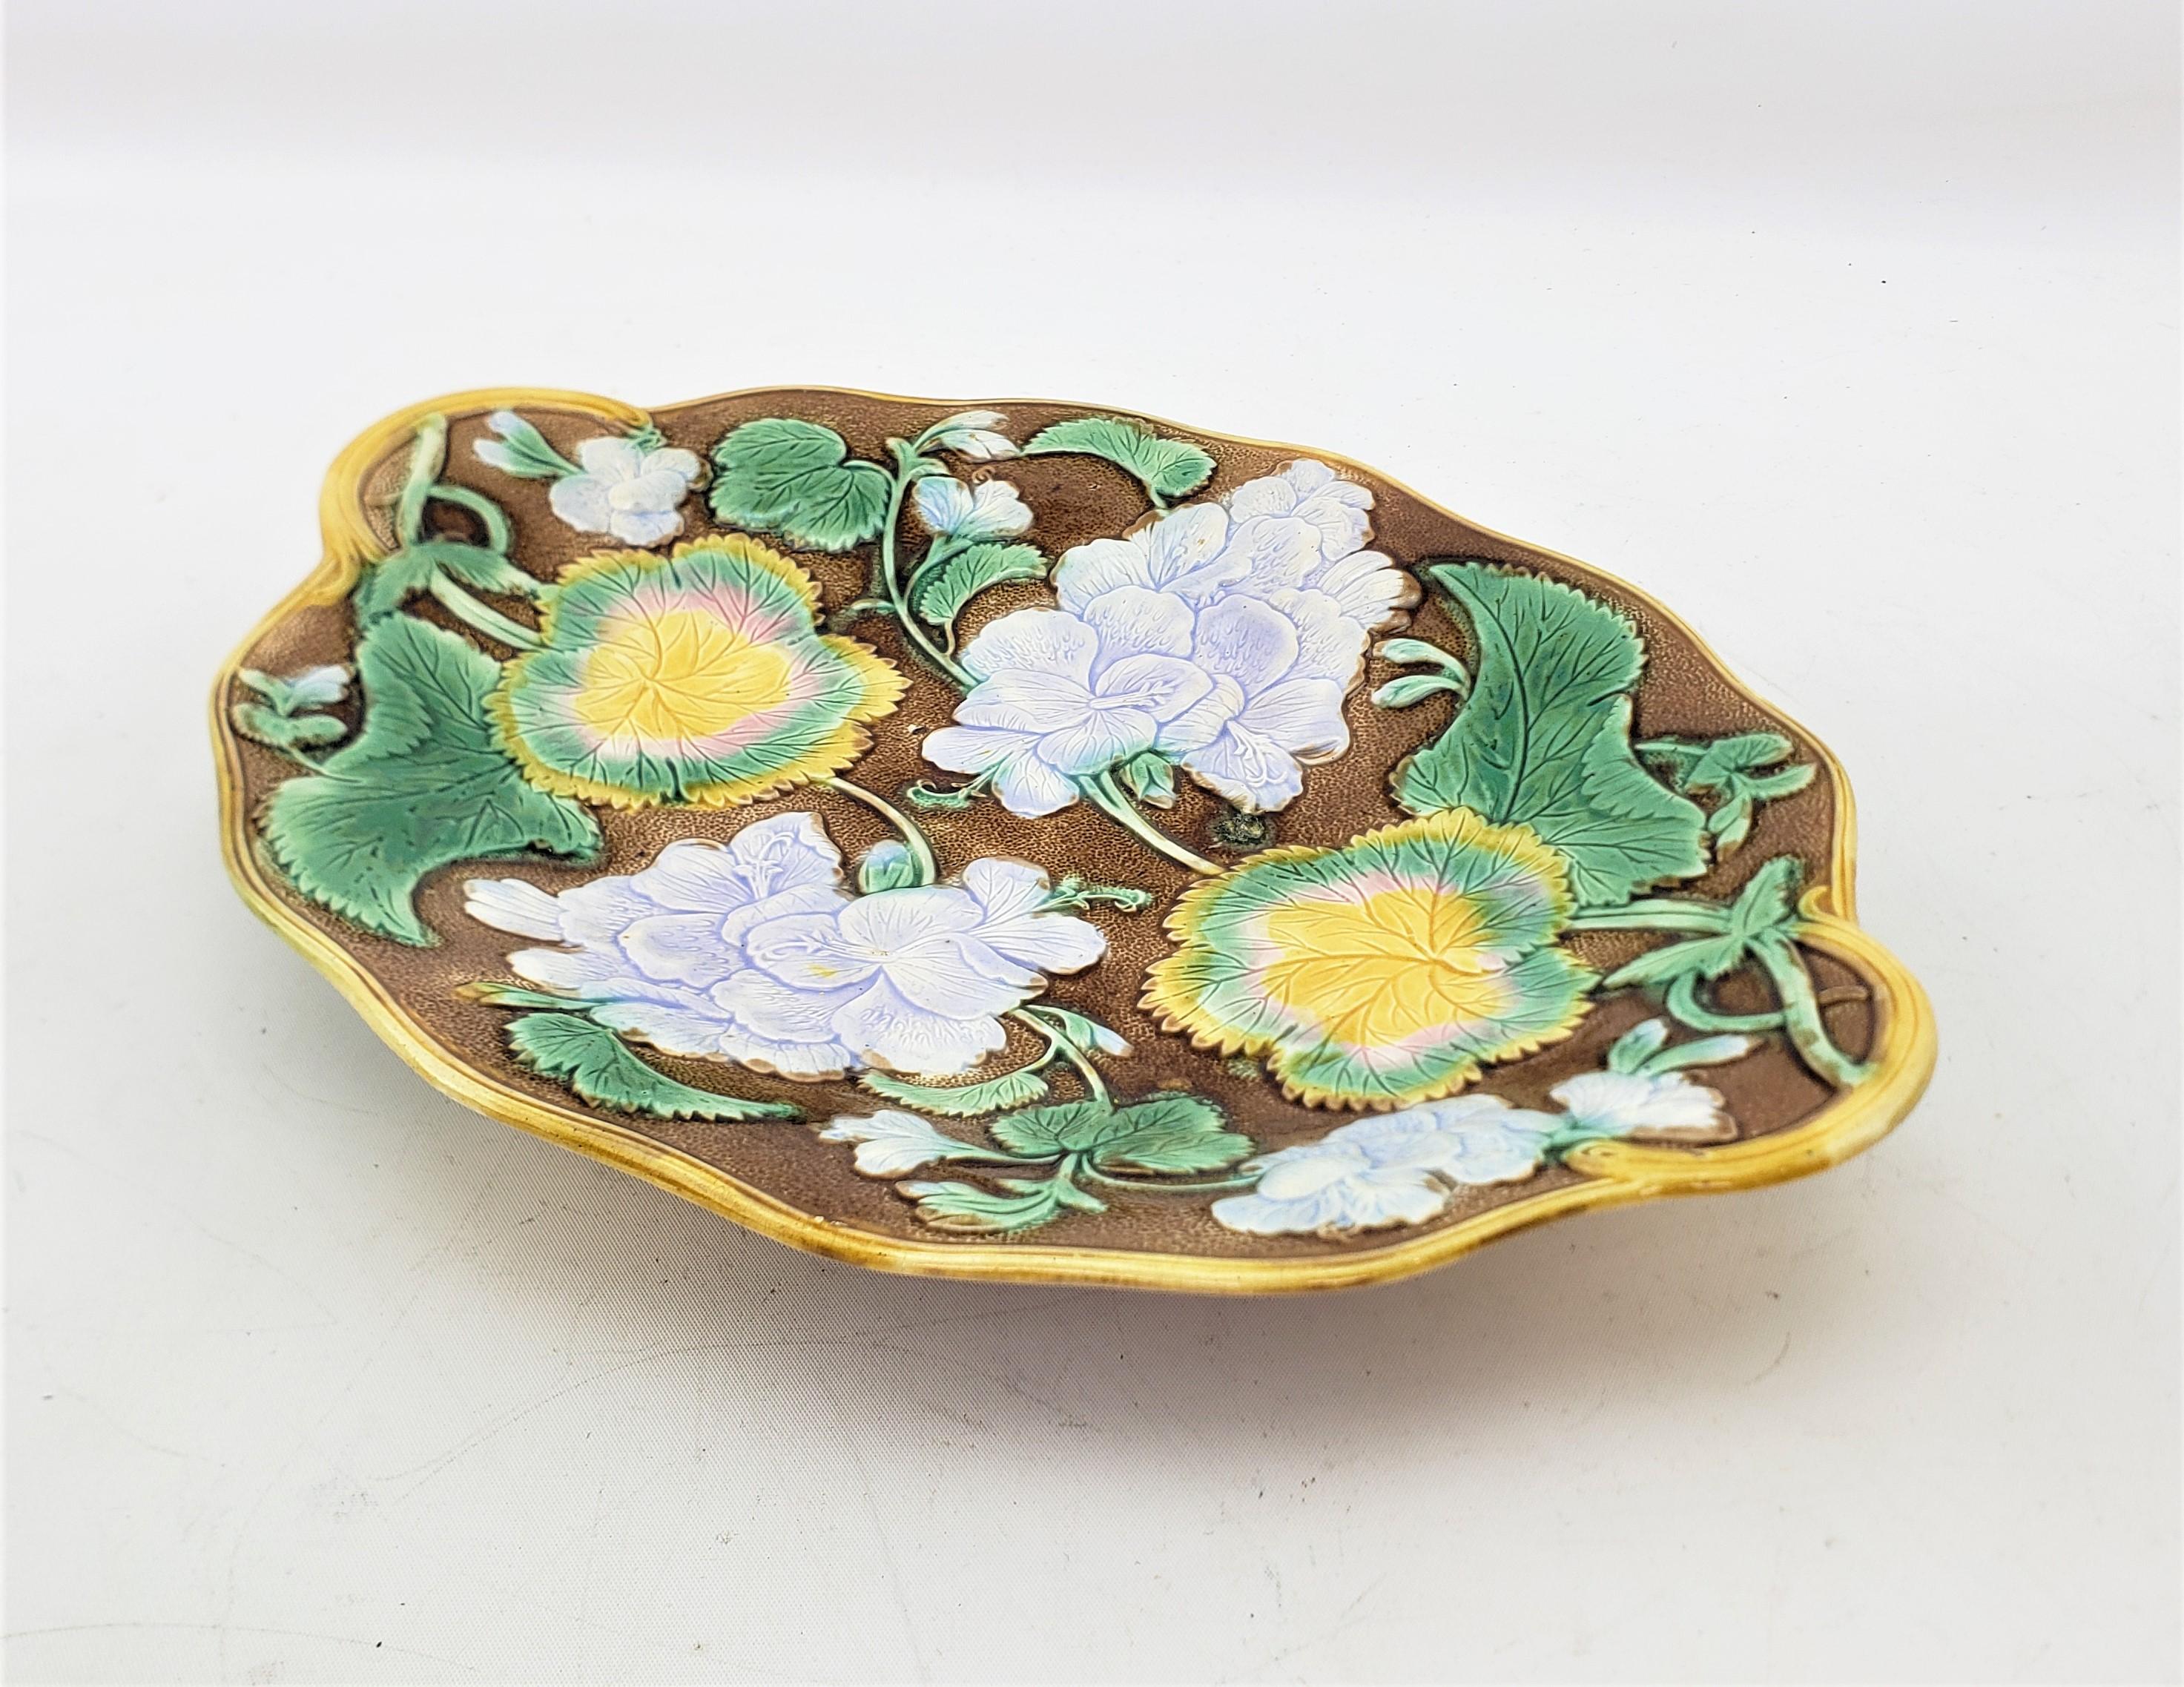 Ceramic Small Antique Majolica Serving Dish or Platter with Leaf & Flower Decoration For Sale